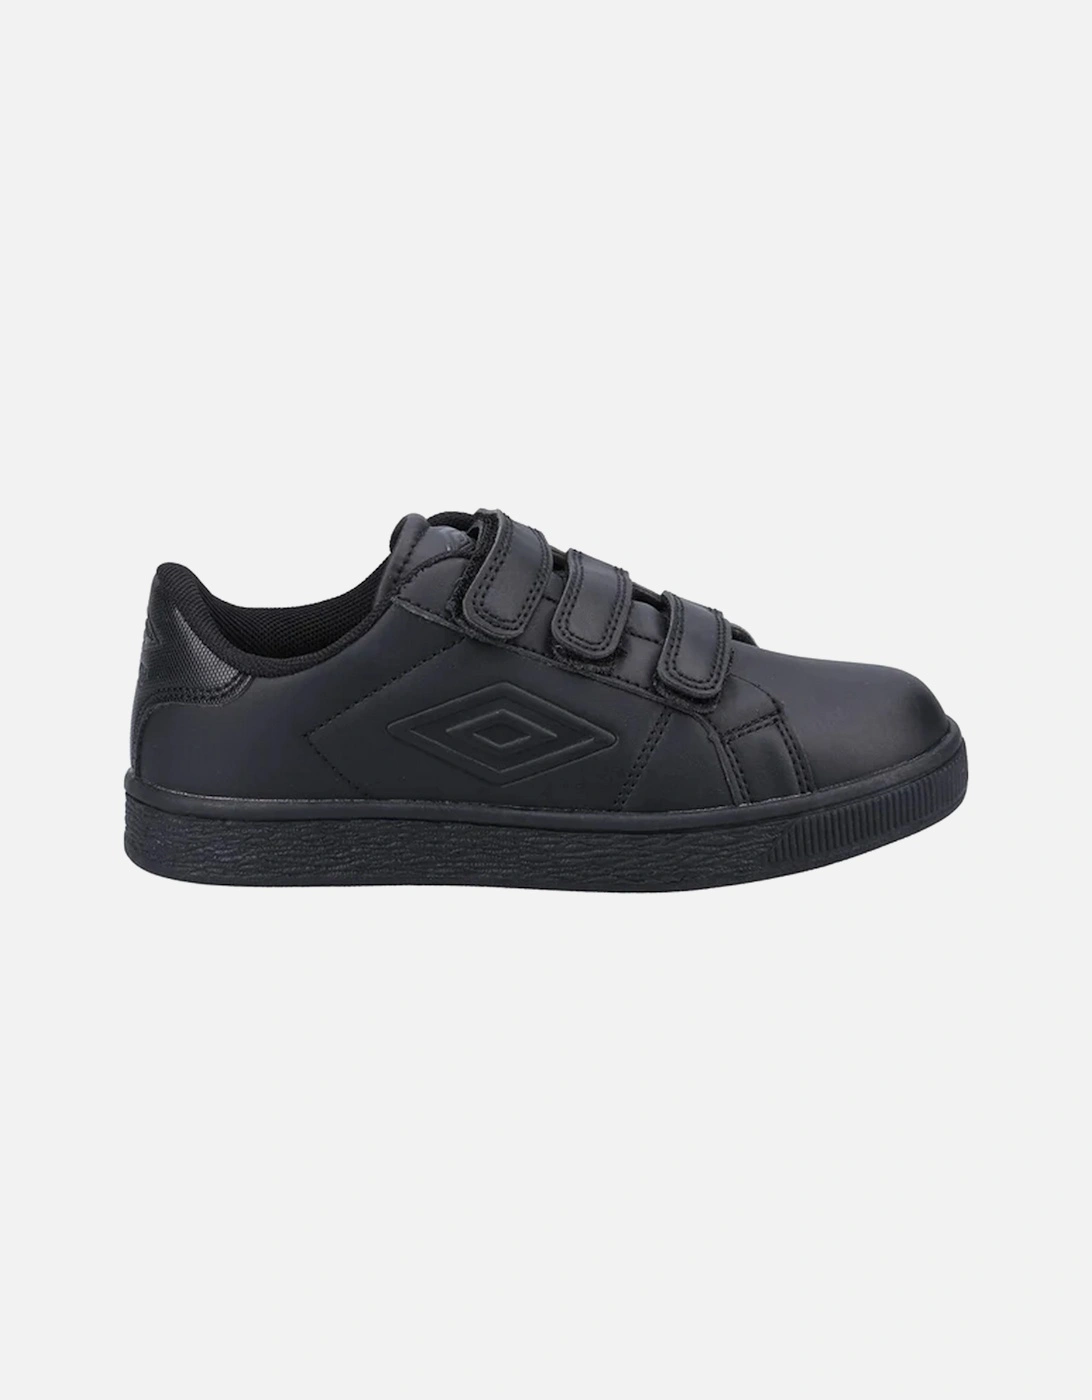 Boys Medway V Jnr Touch Fastening School Shoes